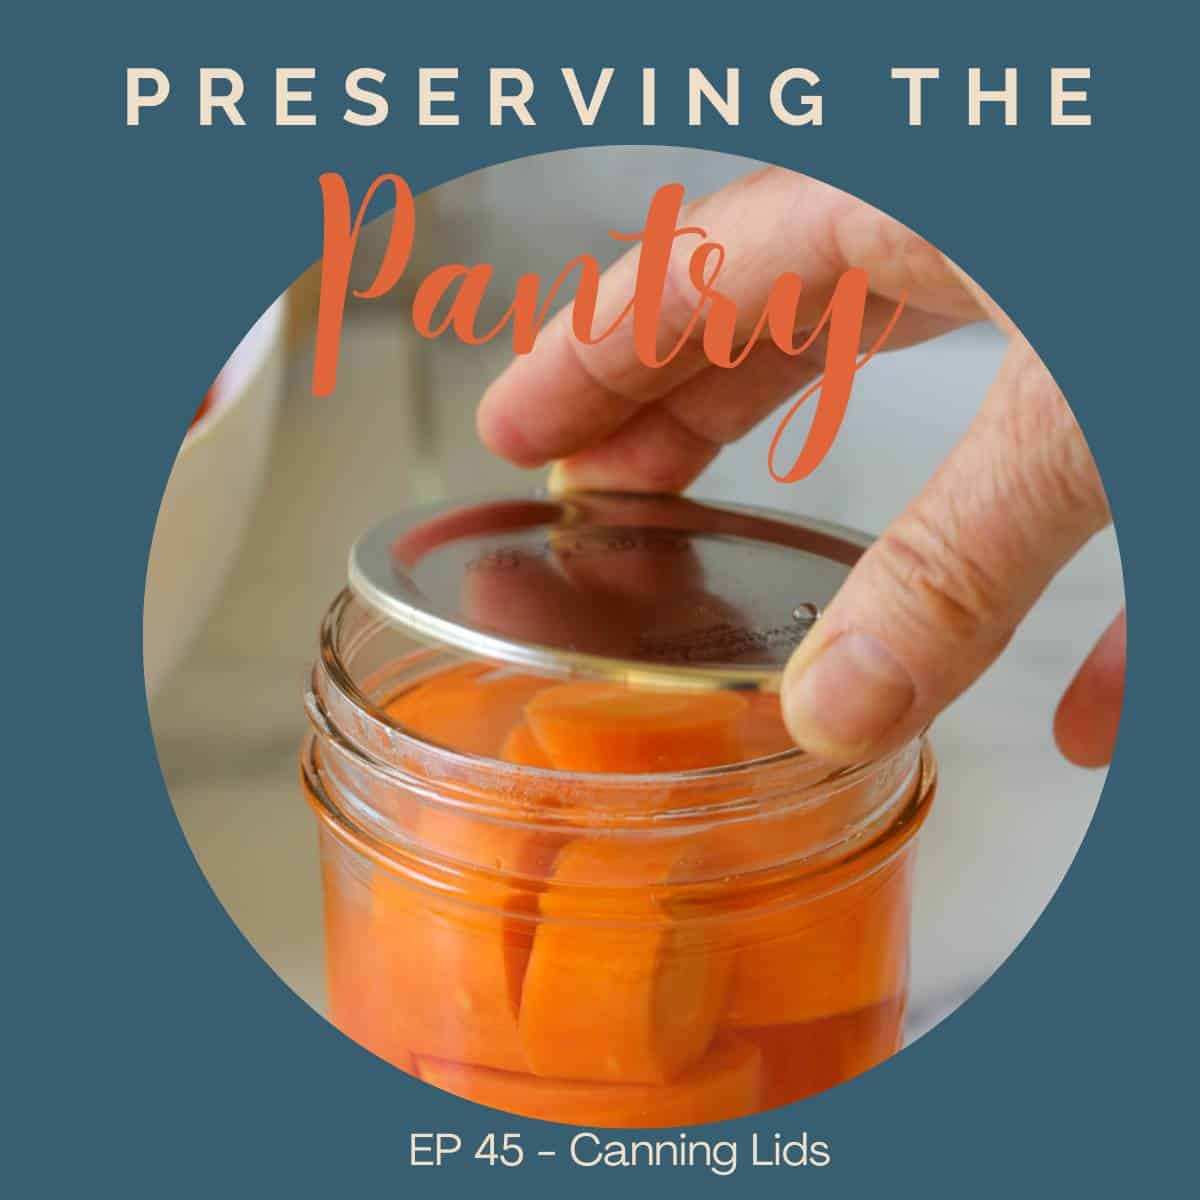 A canning lid on a jar of carrots. 